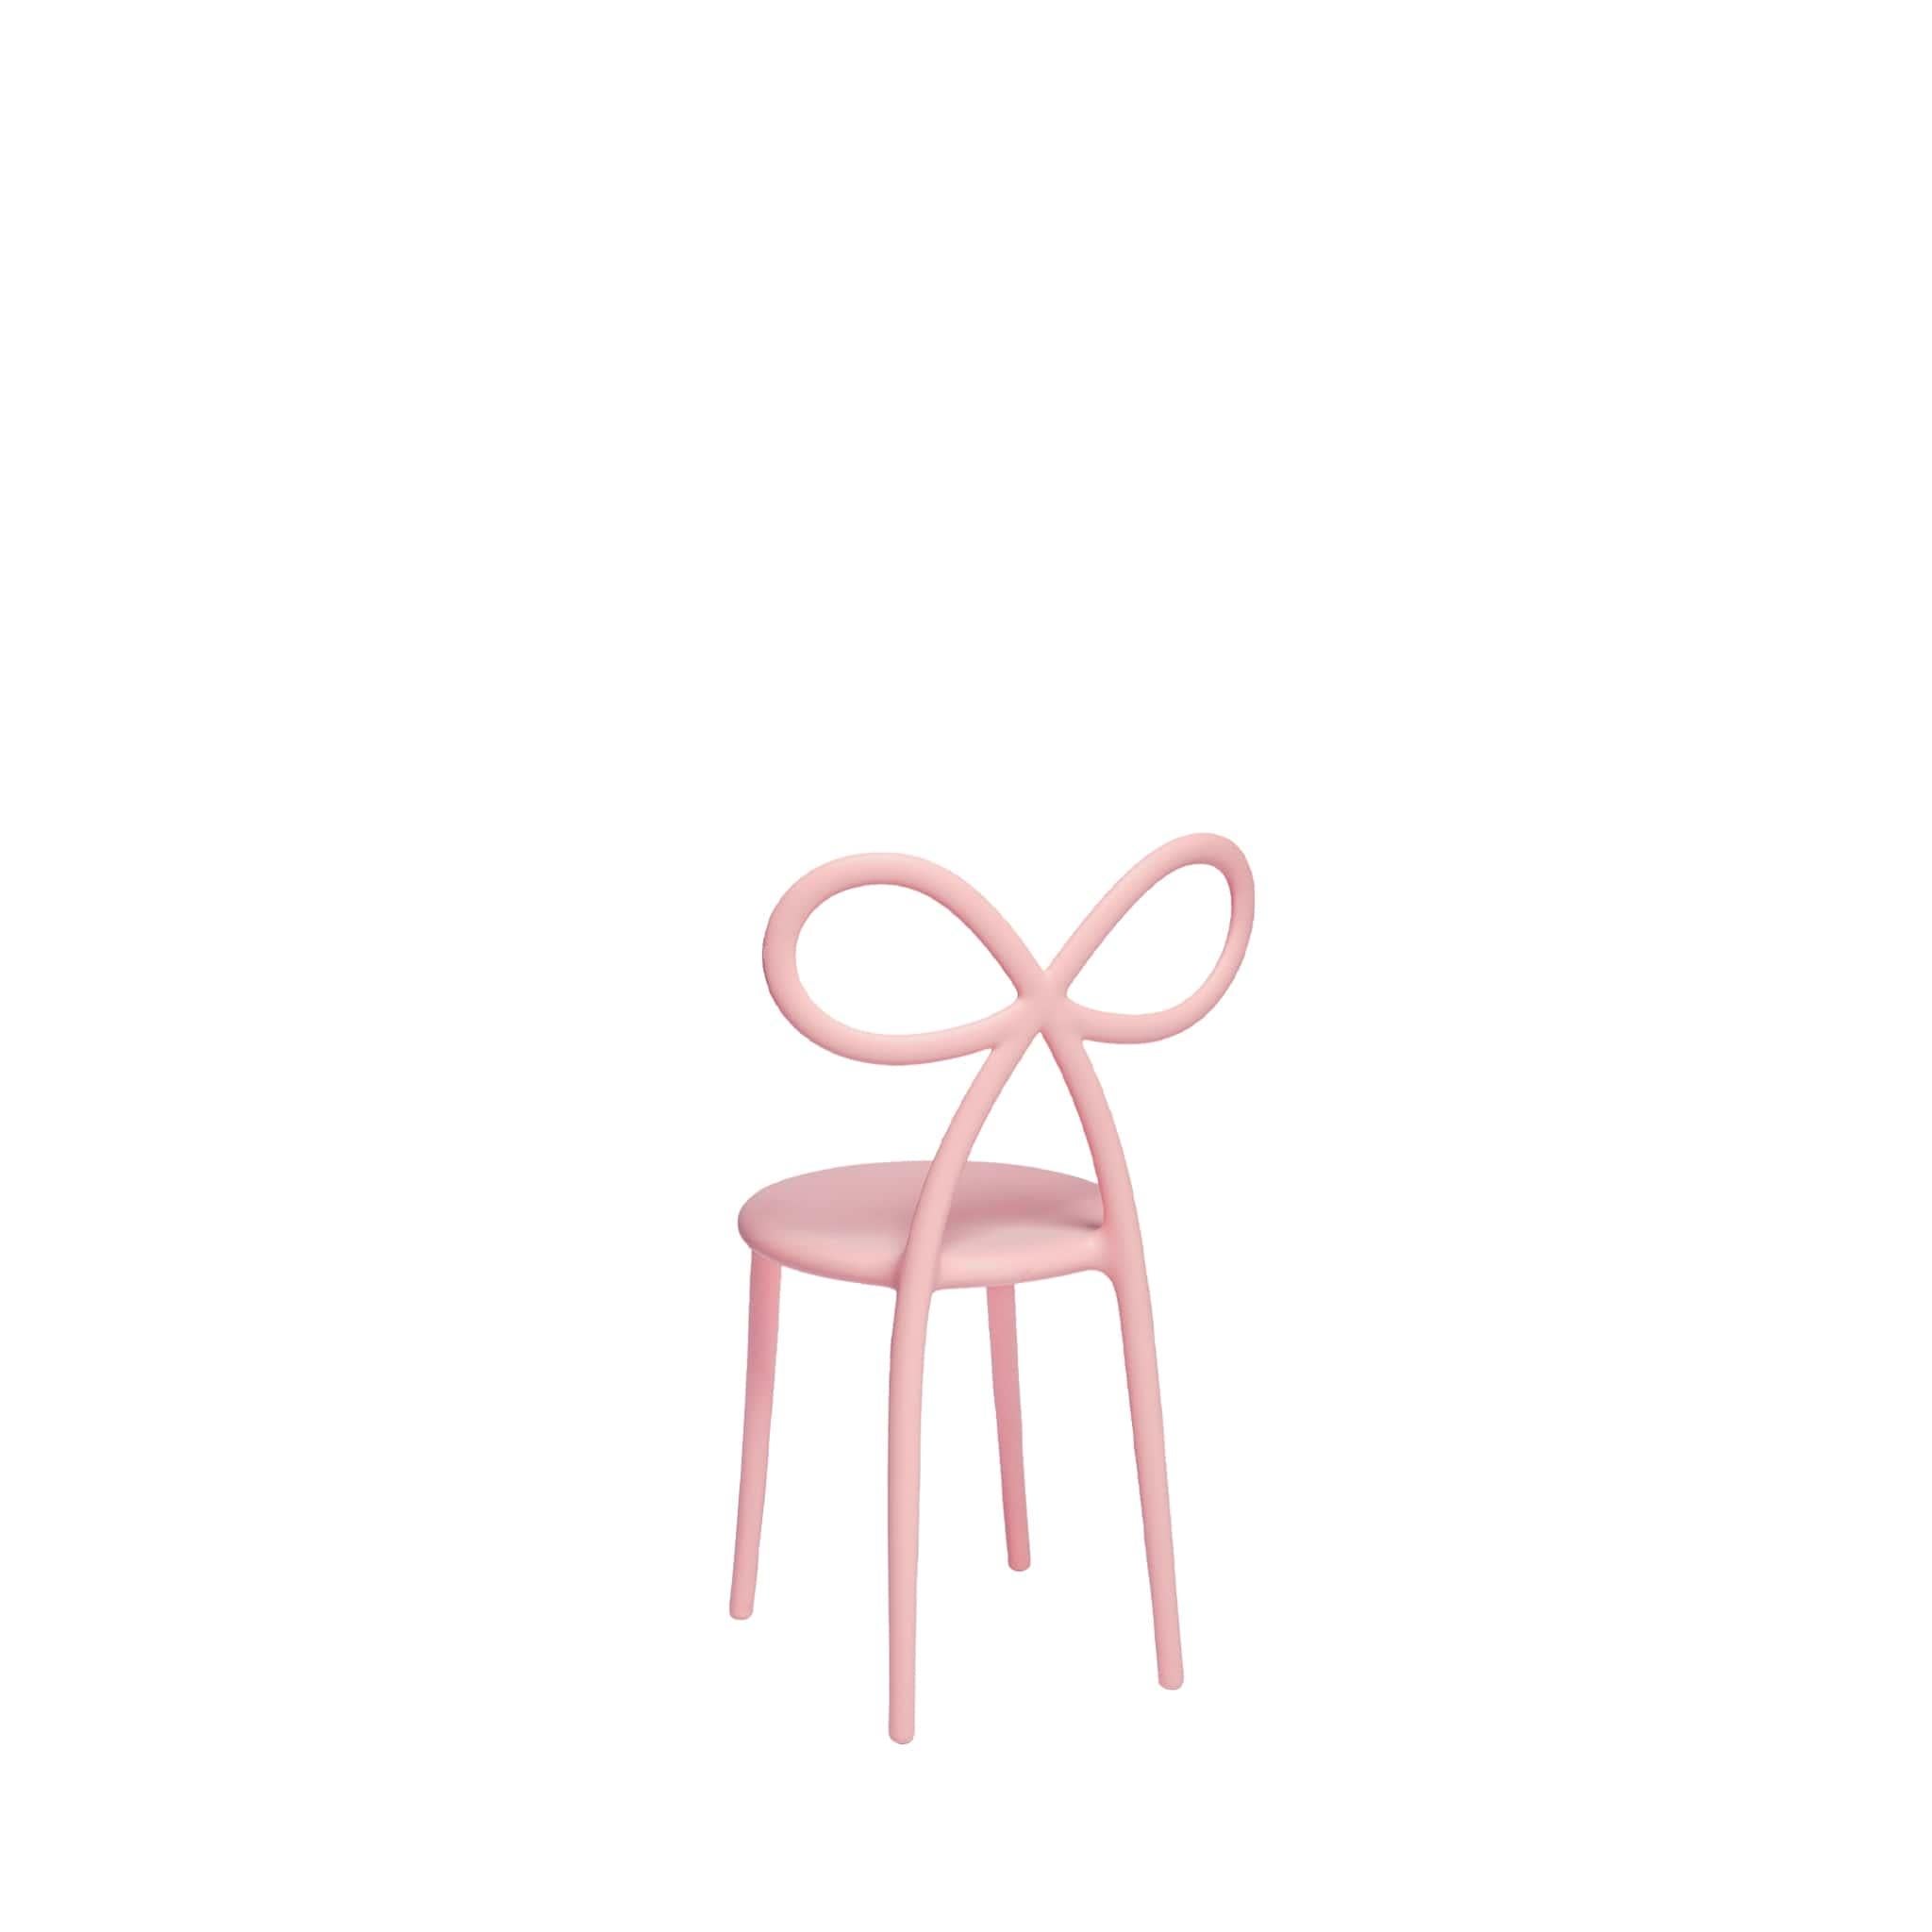 The feminine chair par excellence is now proposed in the mini version, suitable for children. The delicate and essential shapes remind the Ribbon Chair in the original size: that’s how a small-scale chair with a strong identity was born. As in the